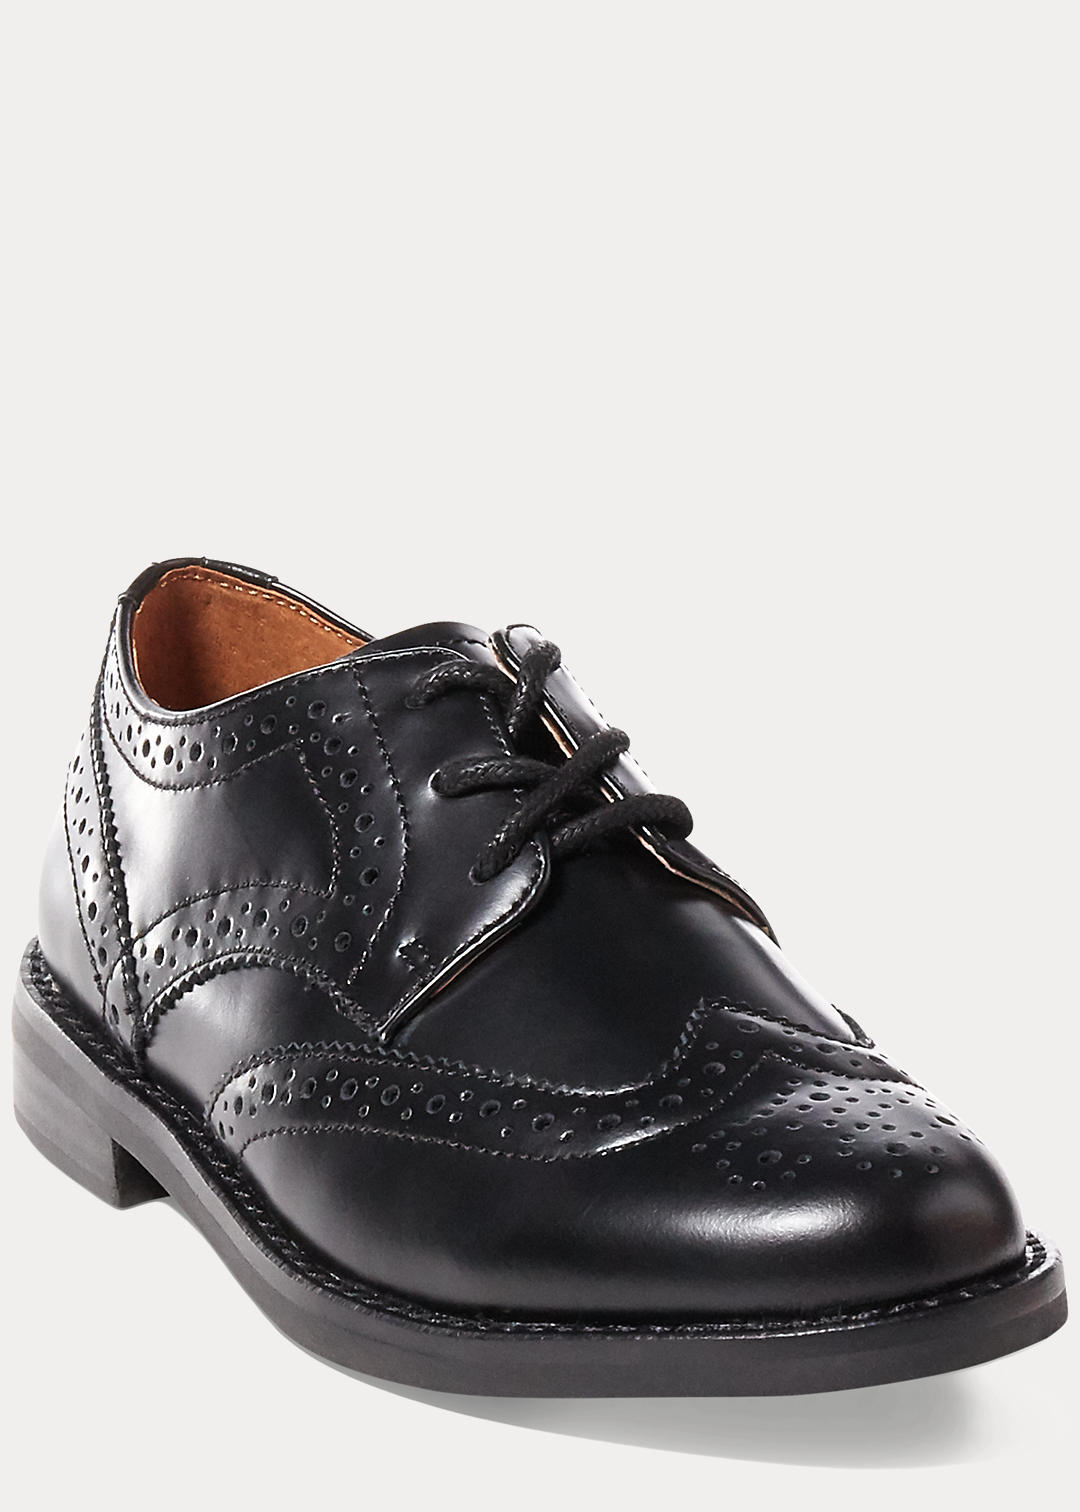 BOYS 1.5-6 YEARS Leather Wingtip Oxford Shoe 3